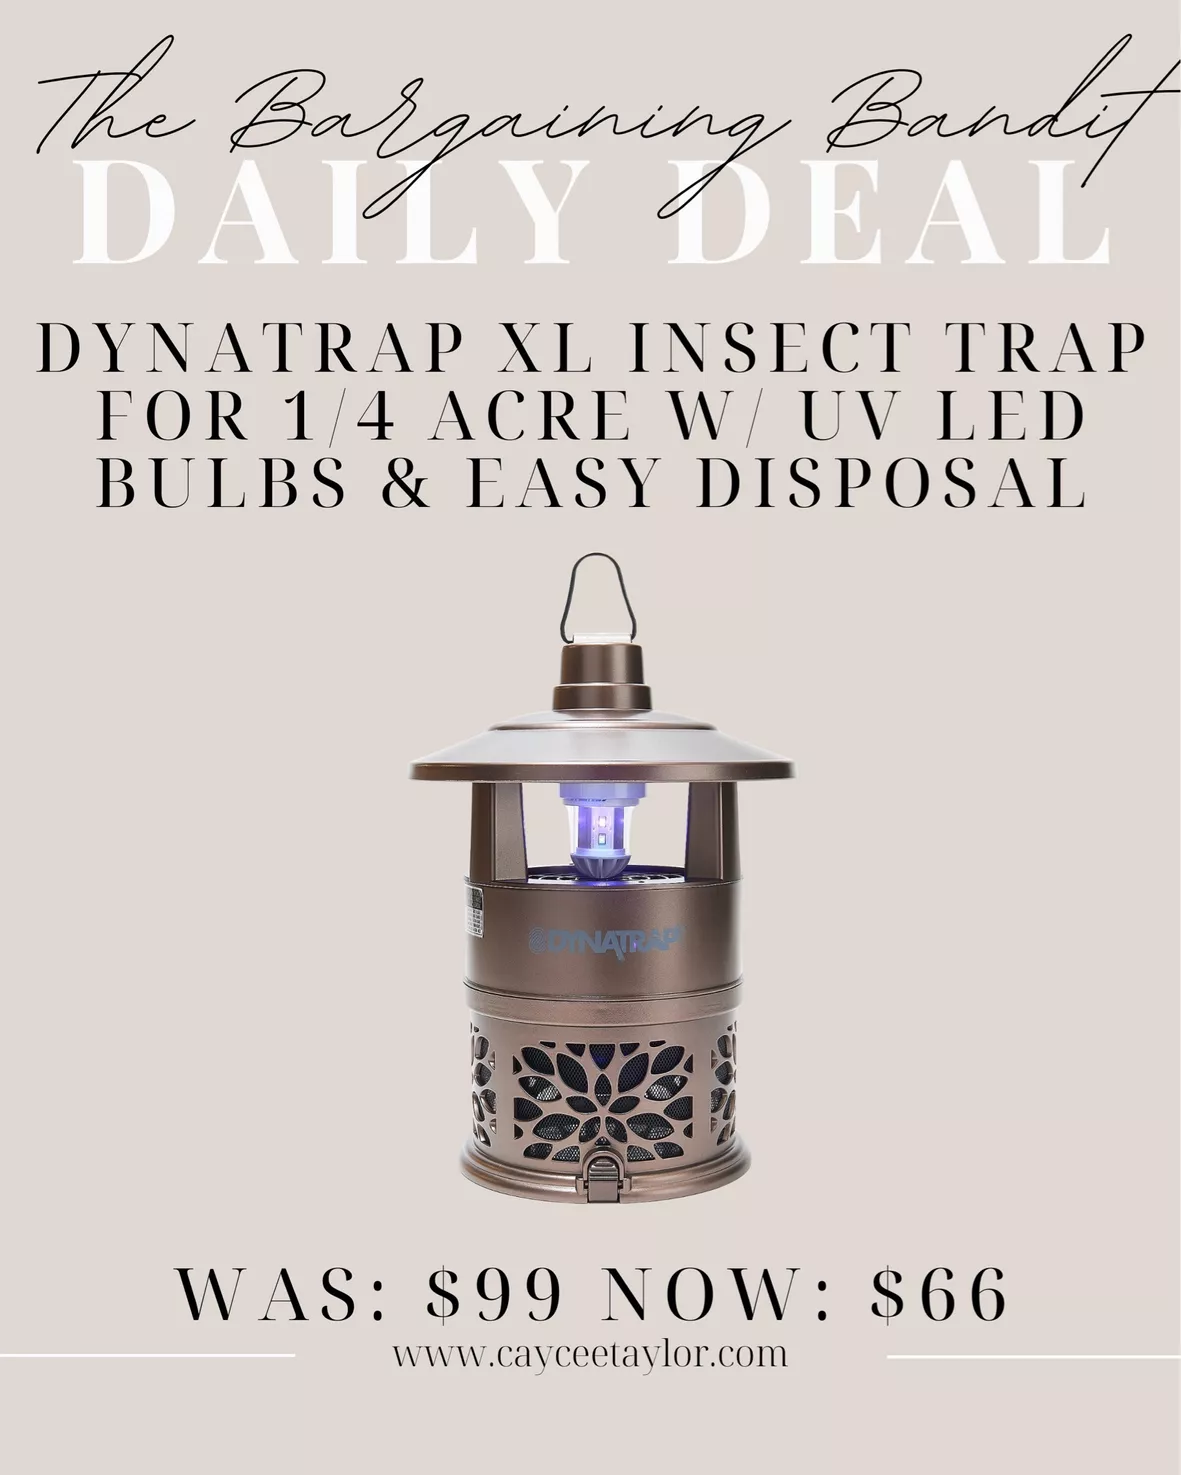 DynaTrap XL Insect Trap For 1/2 Acre w/ UV LED Bulbs & Easy Disposal